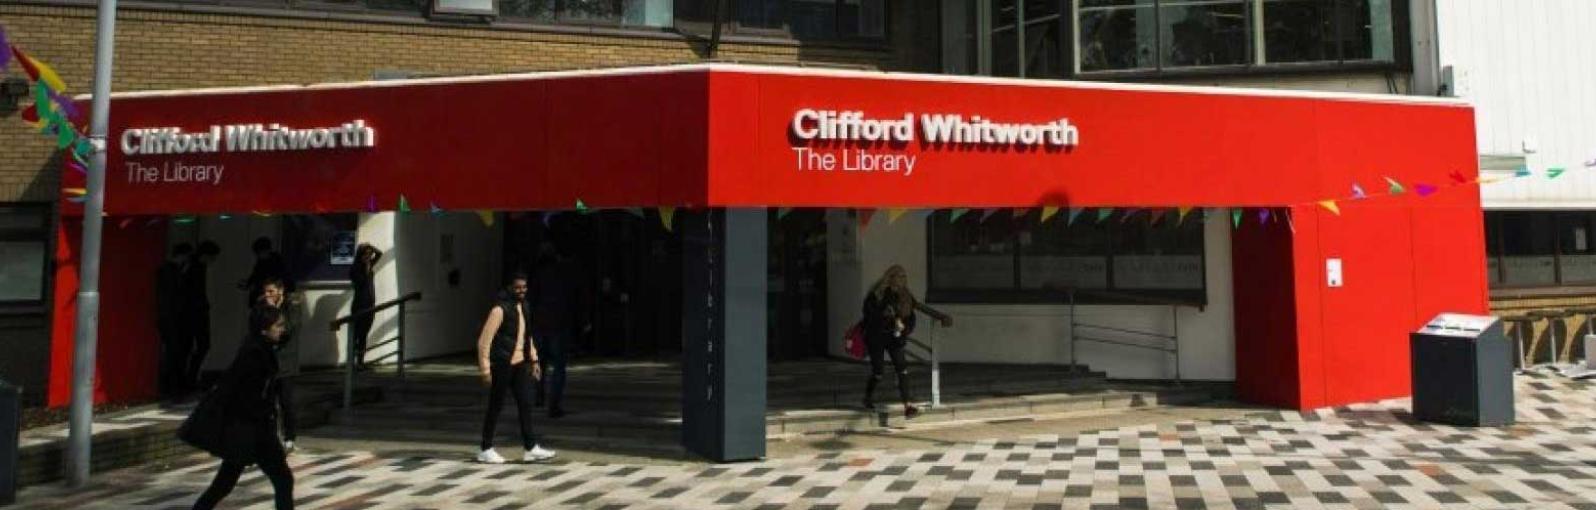 Clifford Whitworth Library entrance